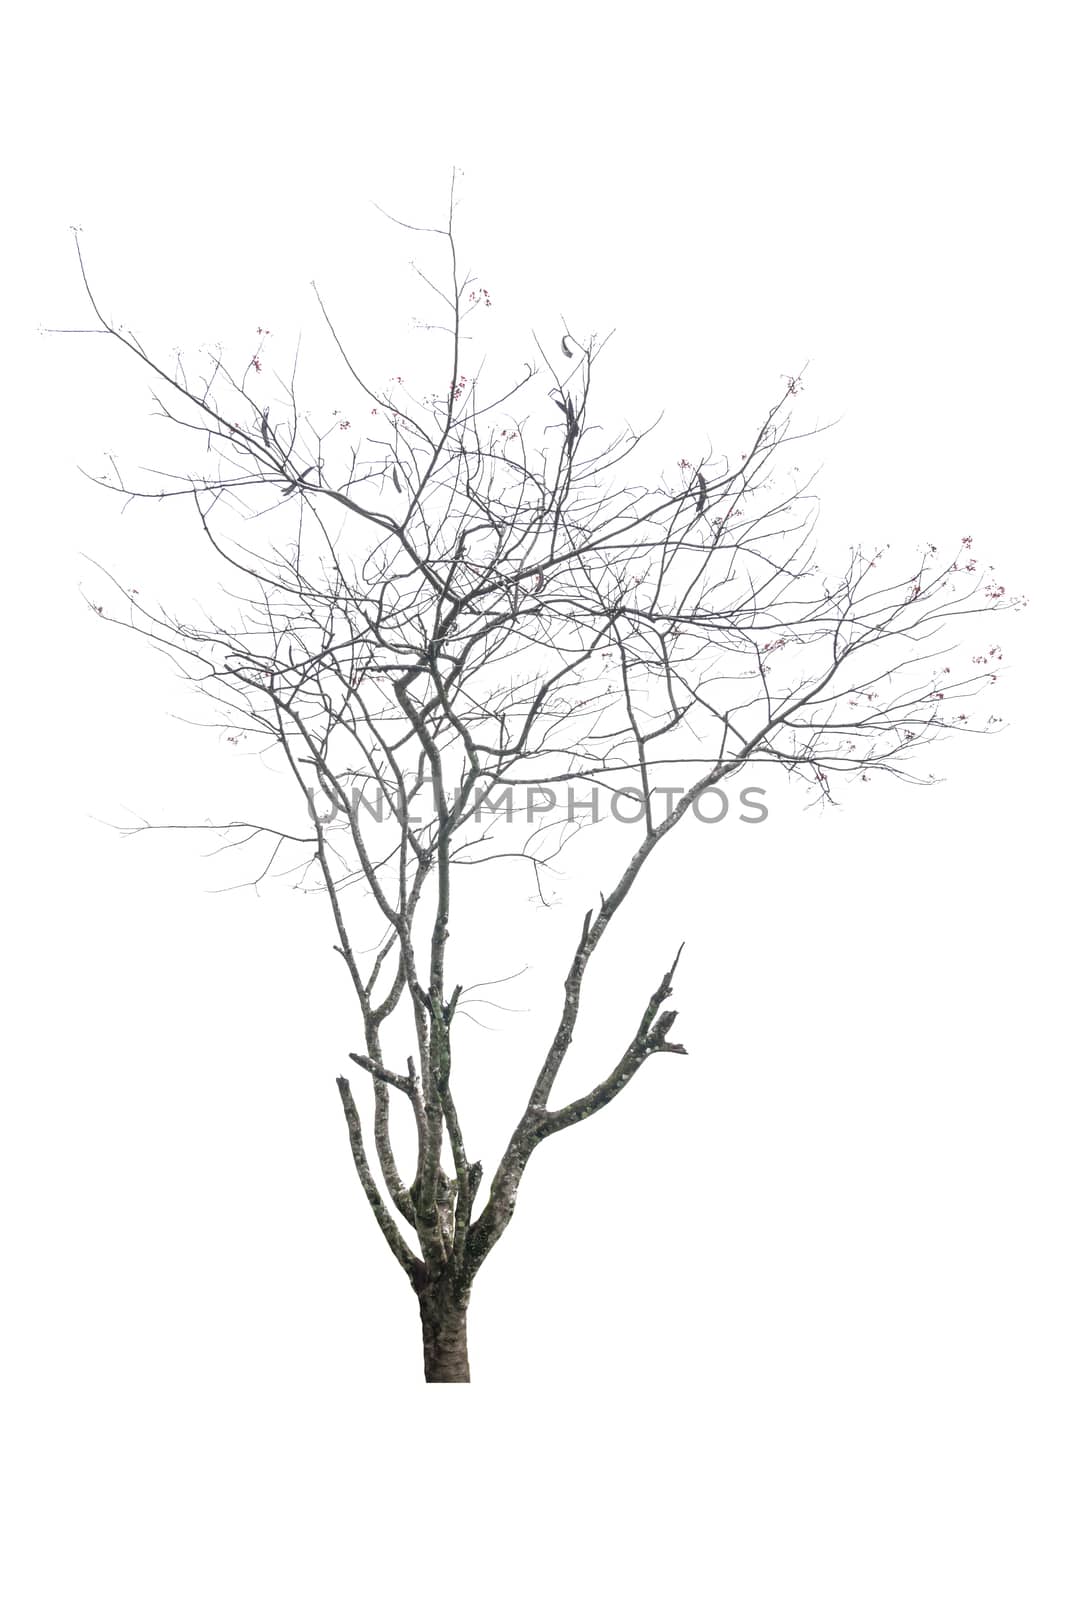 Trees isolated on white background by rakoptonLPN